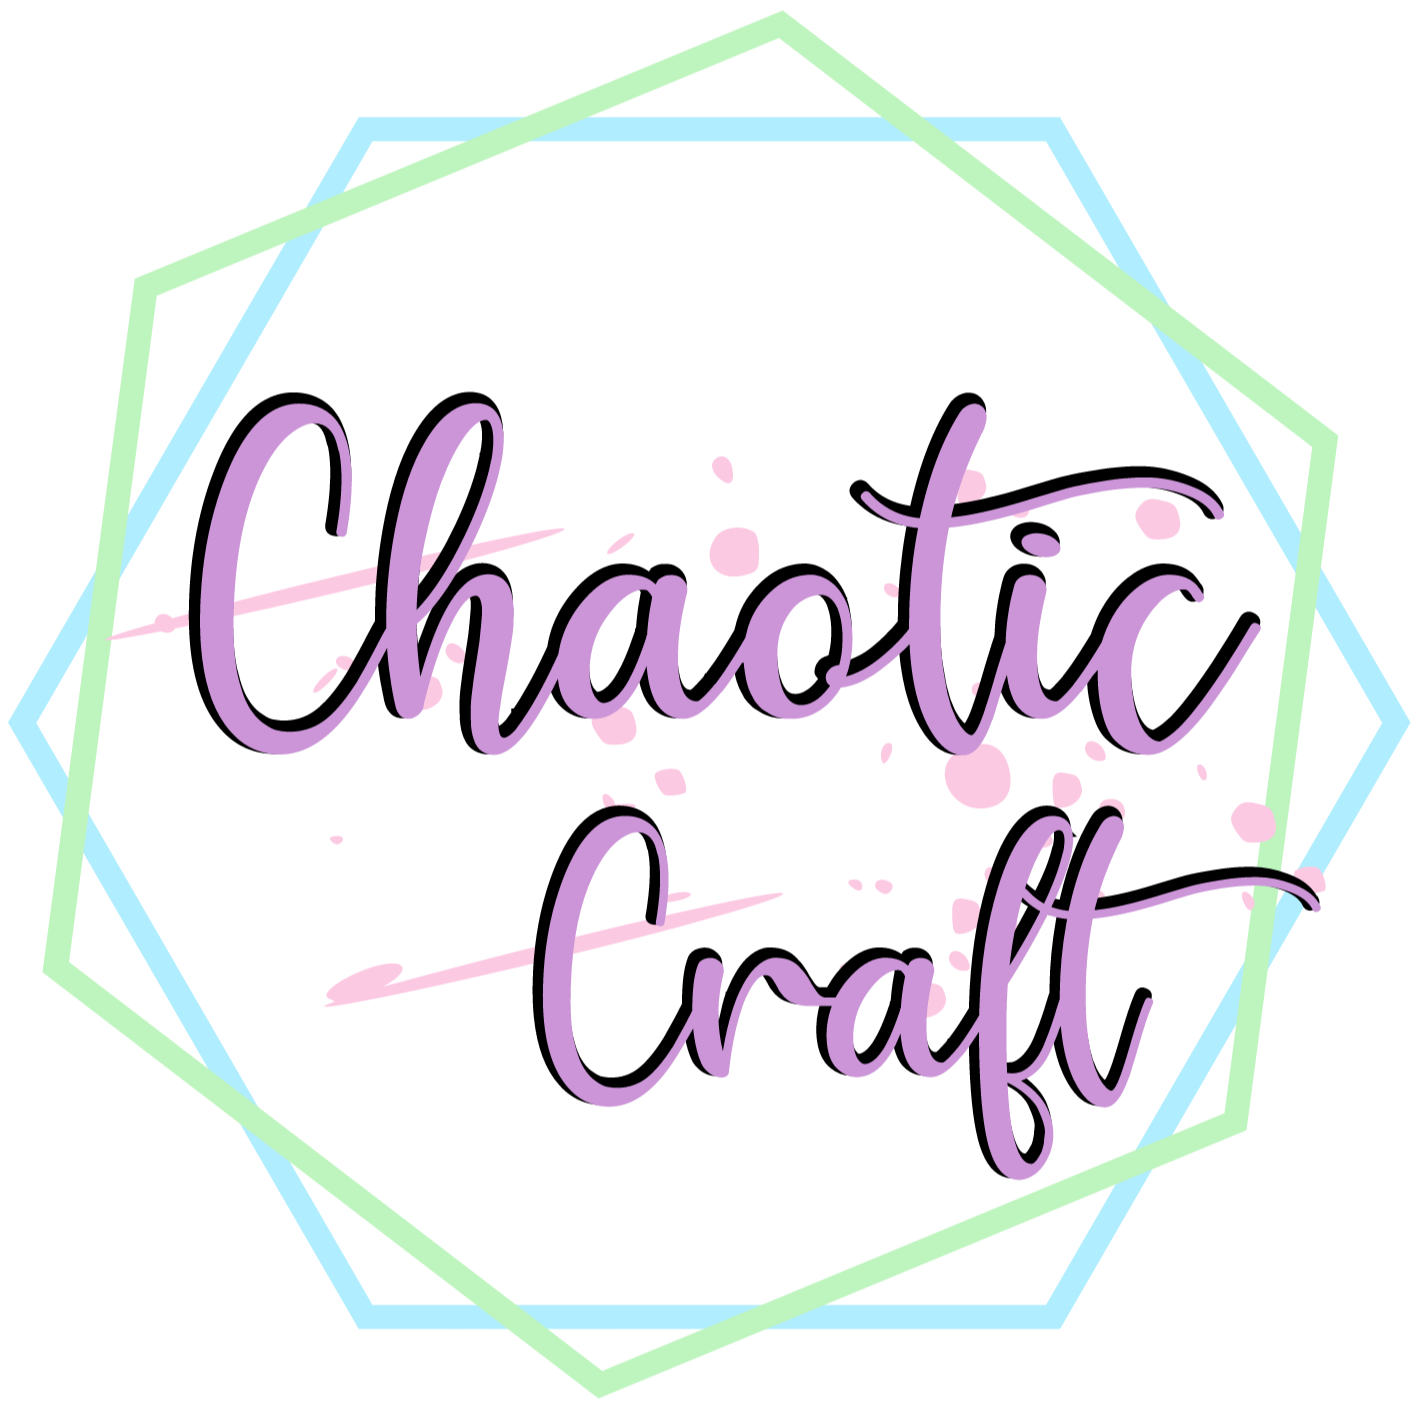 Chaotic Craft